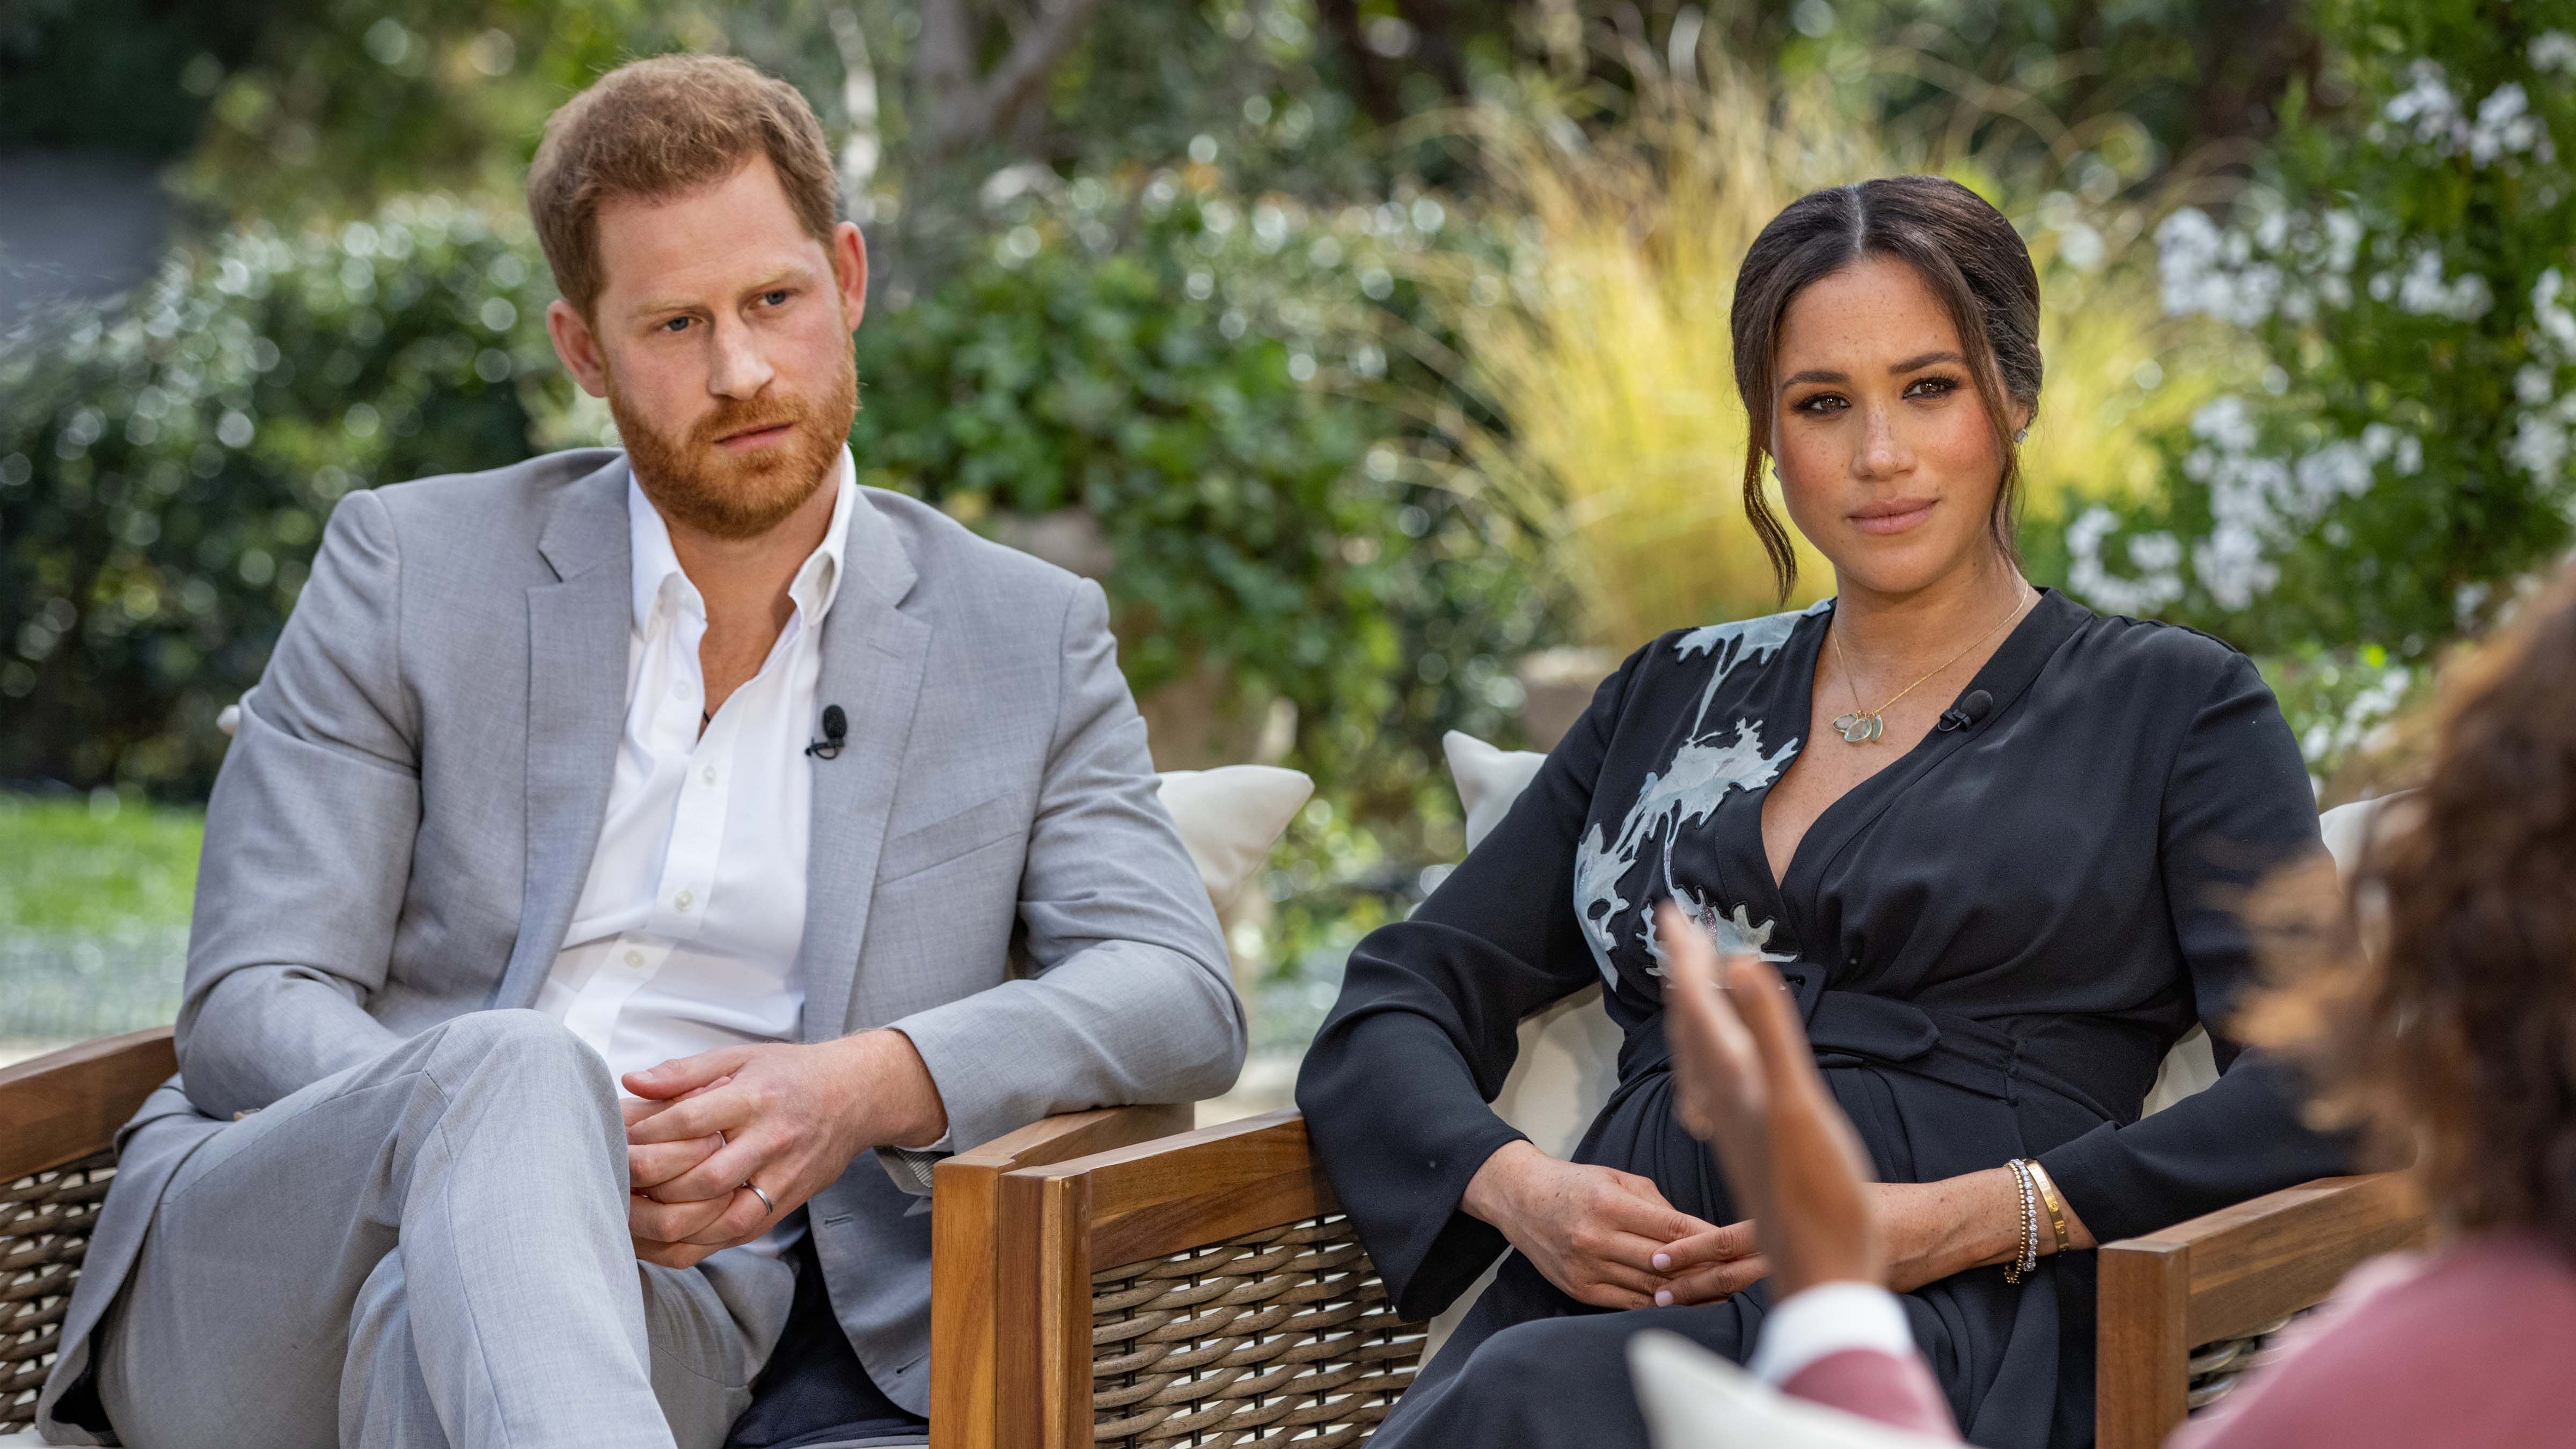 The Queen Wasn't Upset by Prince Harry and Meghan Markle's Oprah Interview, According to a New Biography